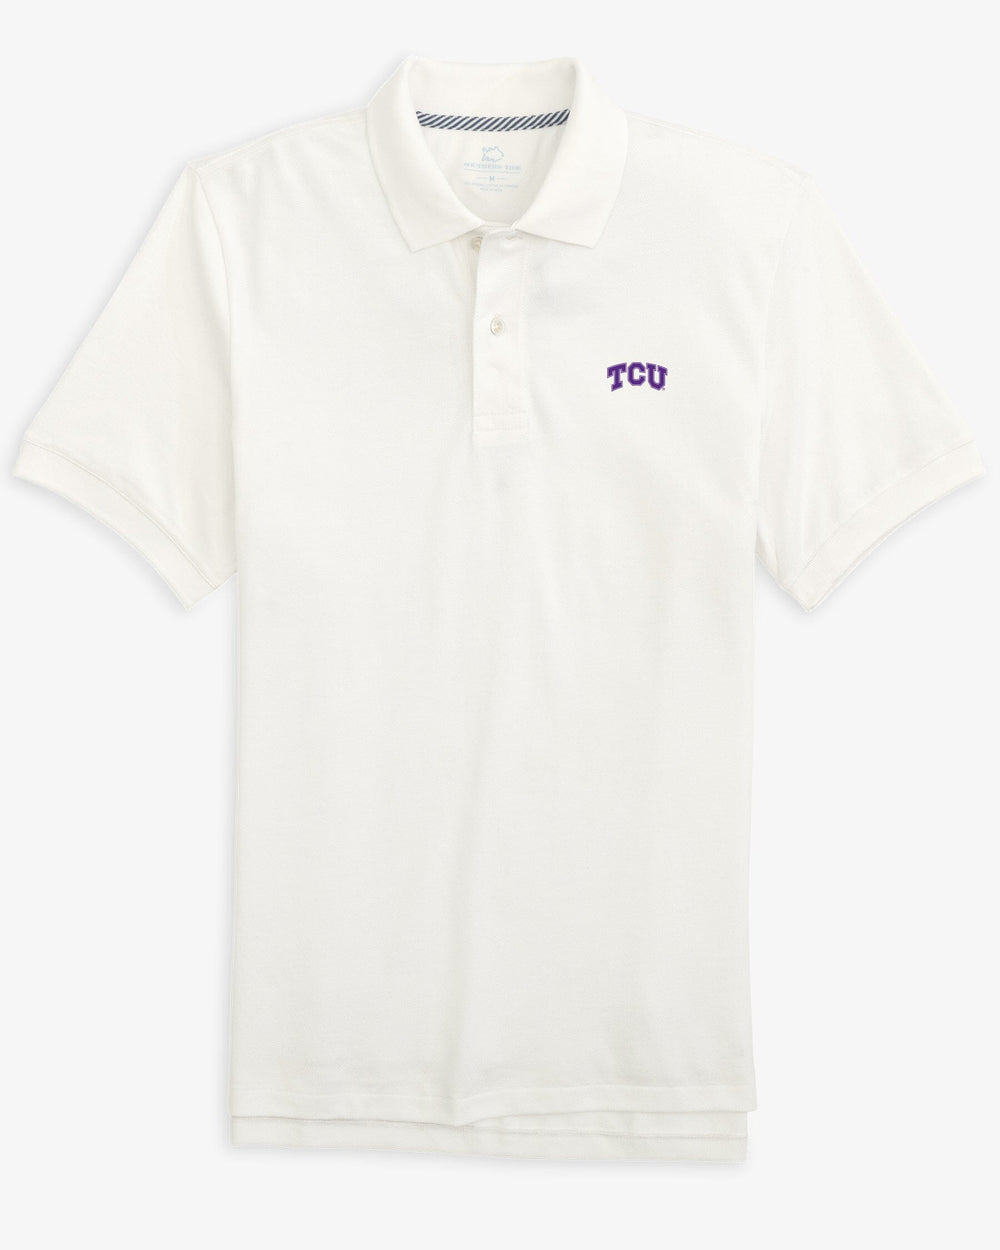 The front view of the Texas Christian Horned Frogs Skipjack Polo by Southern Tide - Classic White